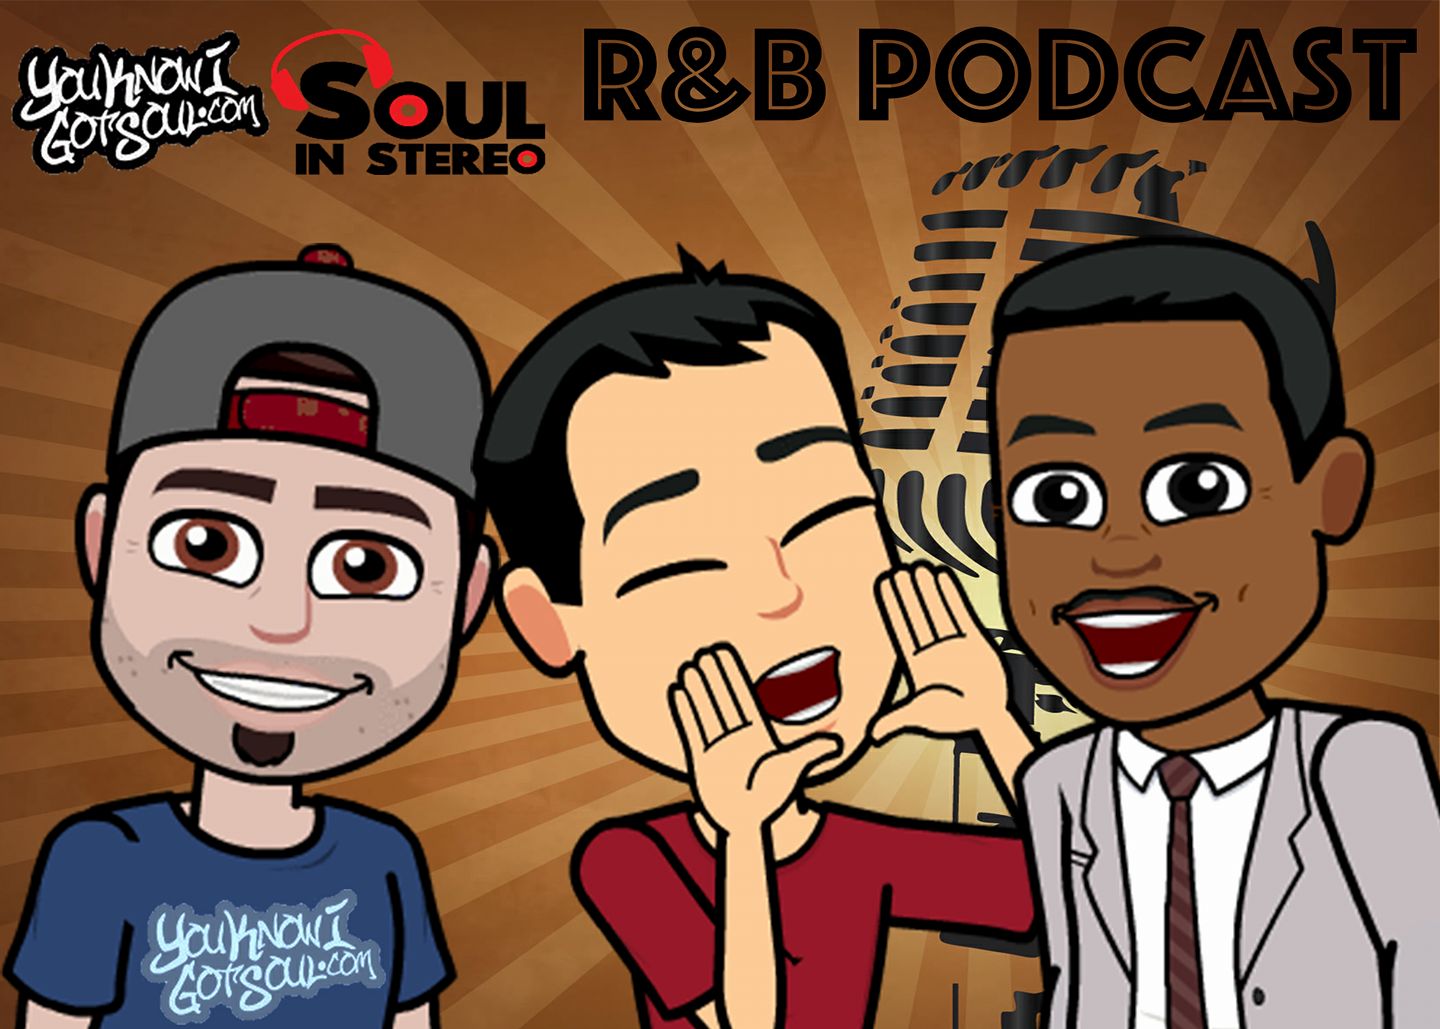 Here Are Some R&B Albums You Need To Listen To – YouKnowIGotSoul R&B Podcast Episode #60